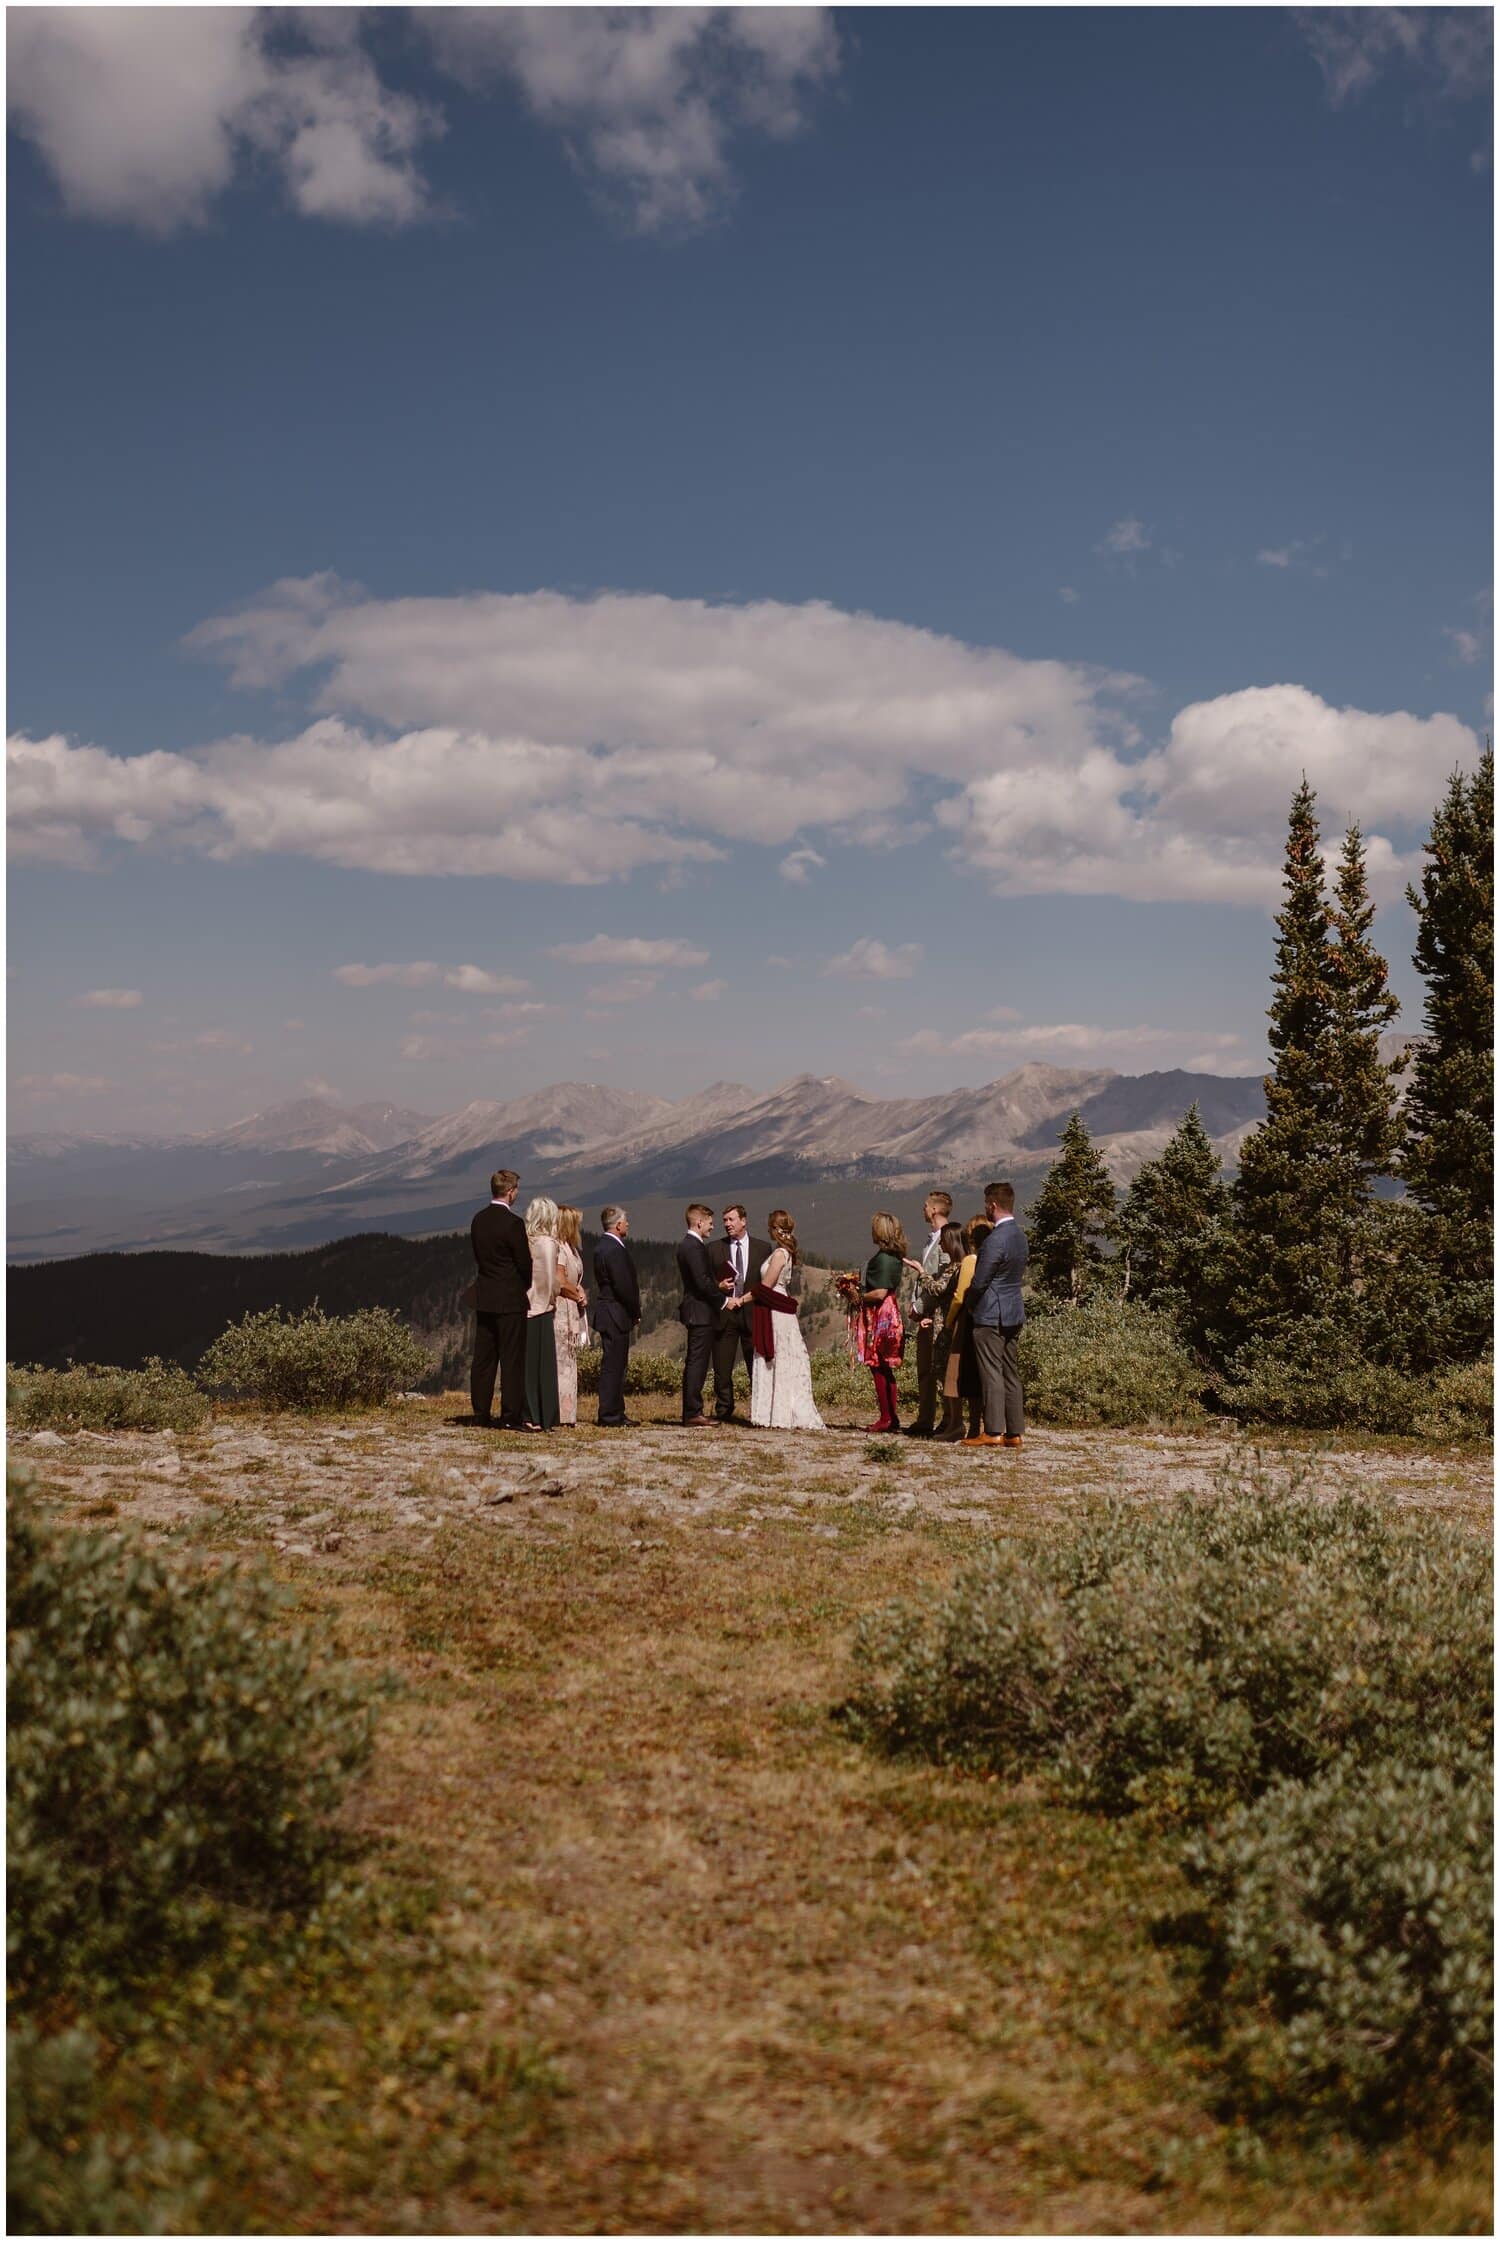 Bride and groom's families surround them during an intimate ceremony, with mountains in background, in Buena Vista Colorado. 